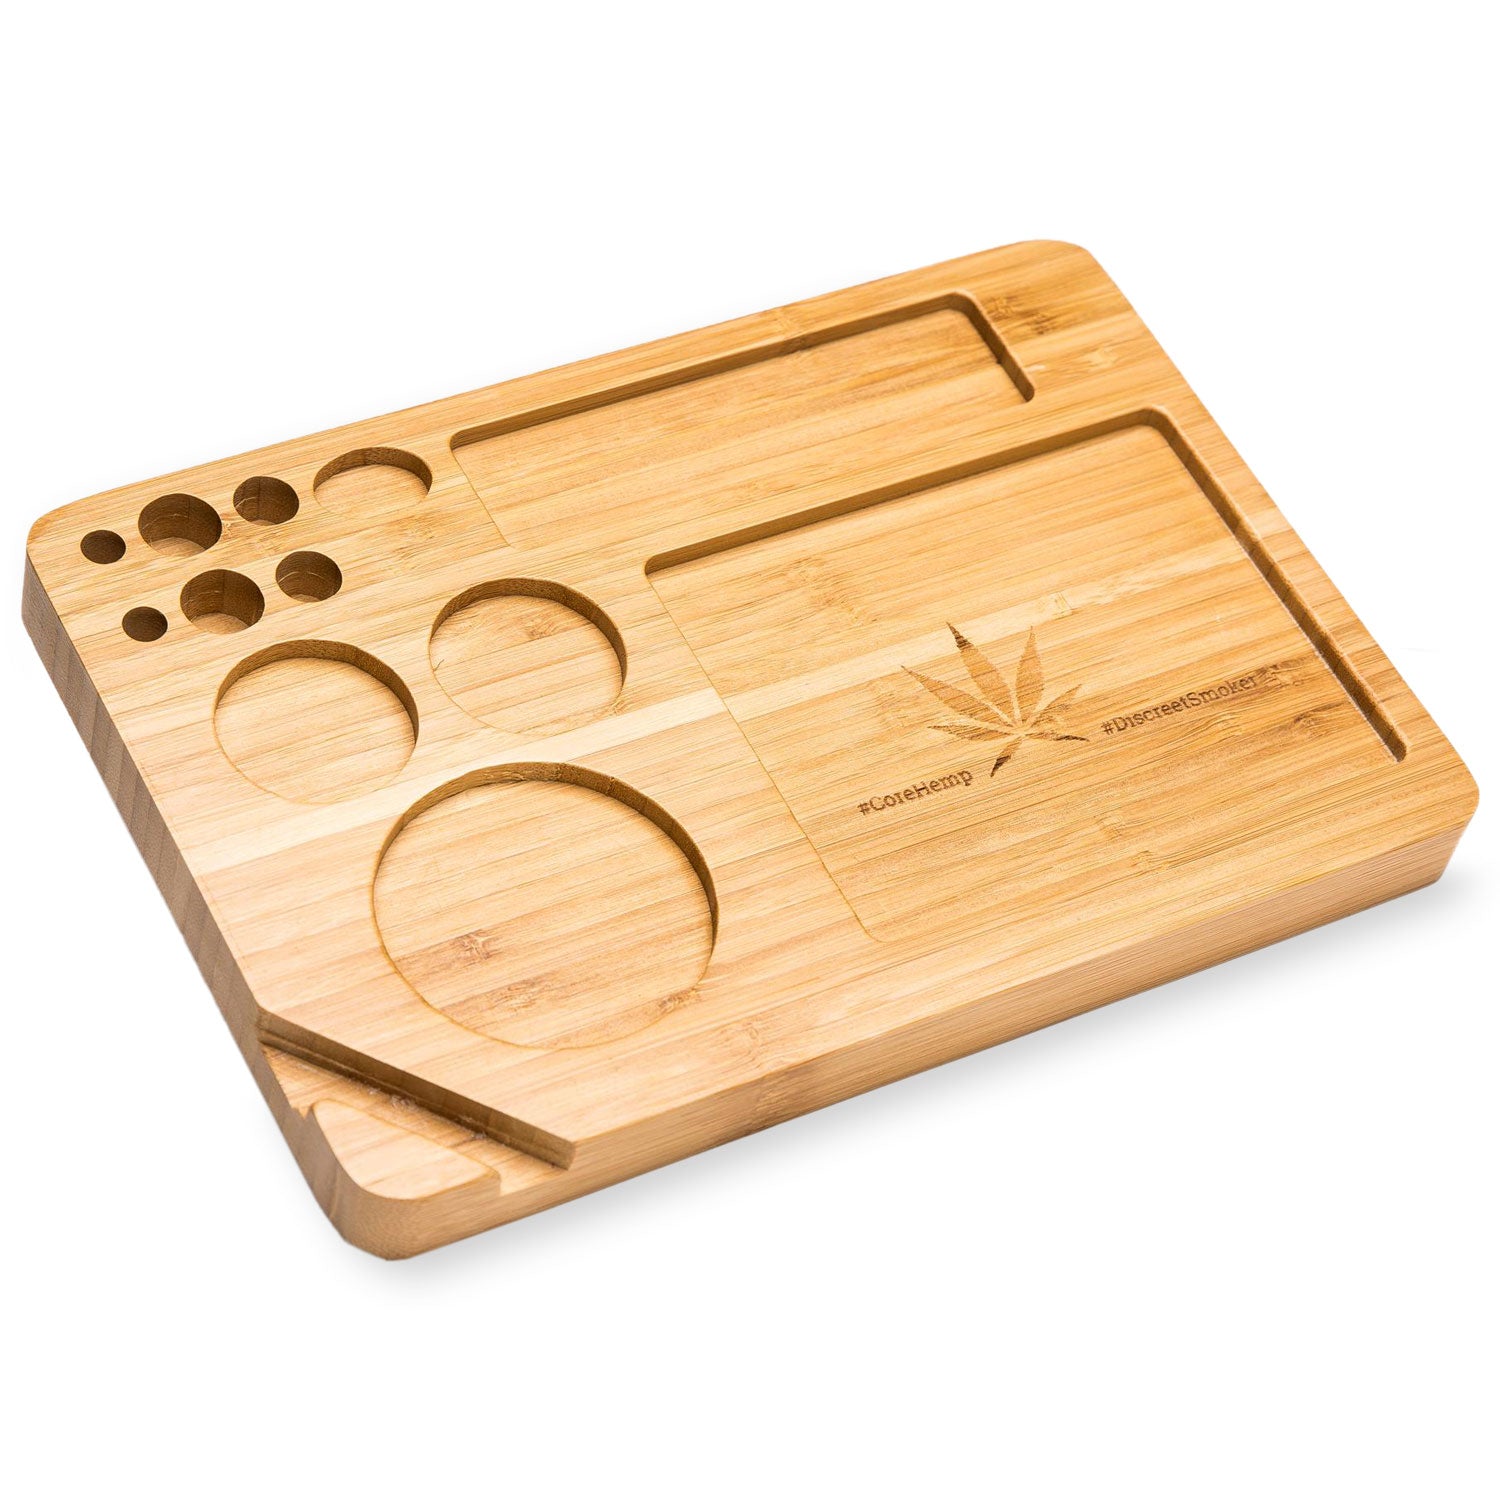 Bamboo Rolling Tray Front View Alternative, bamboo rolling tray, natural bamboo tray, raw bamboo rolling tray, raw rolling tray wood, bamboo tray, inexpensive rolling tray, rolling tray for sale, unique rolling trays, blunt rolling tray, blunt tray, cool rolling tray, small rolling tray, weed rolling tray